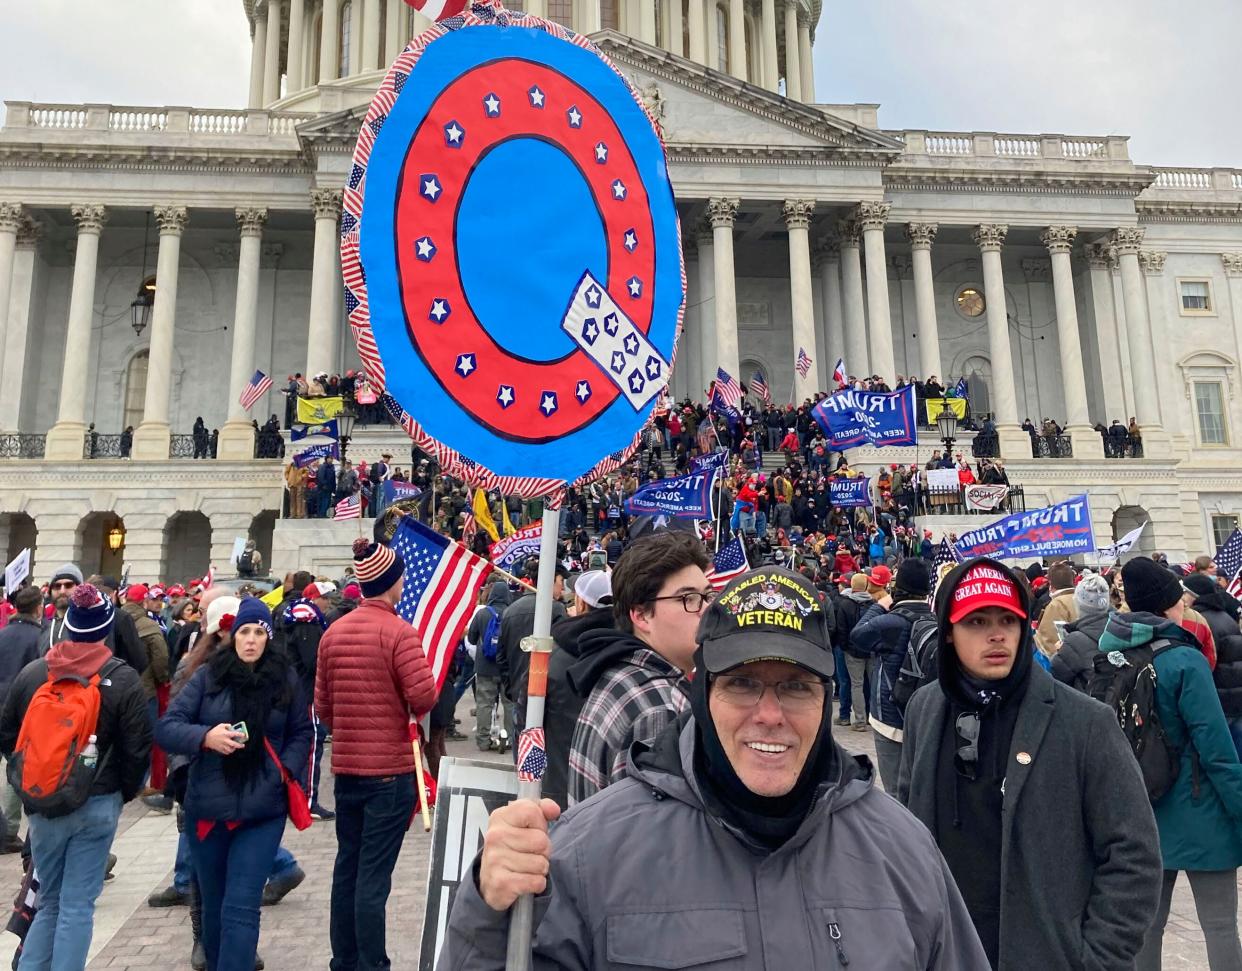 Supporters of QAnon were out in force at the Jan. 6 siege of the U.S. Capitol.  (Photo: zz/STRF/STAR MAX/IPx)